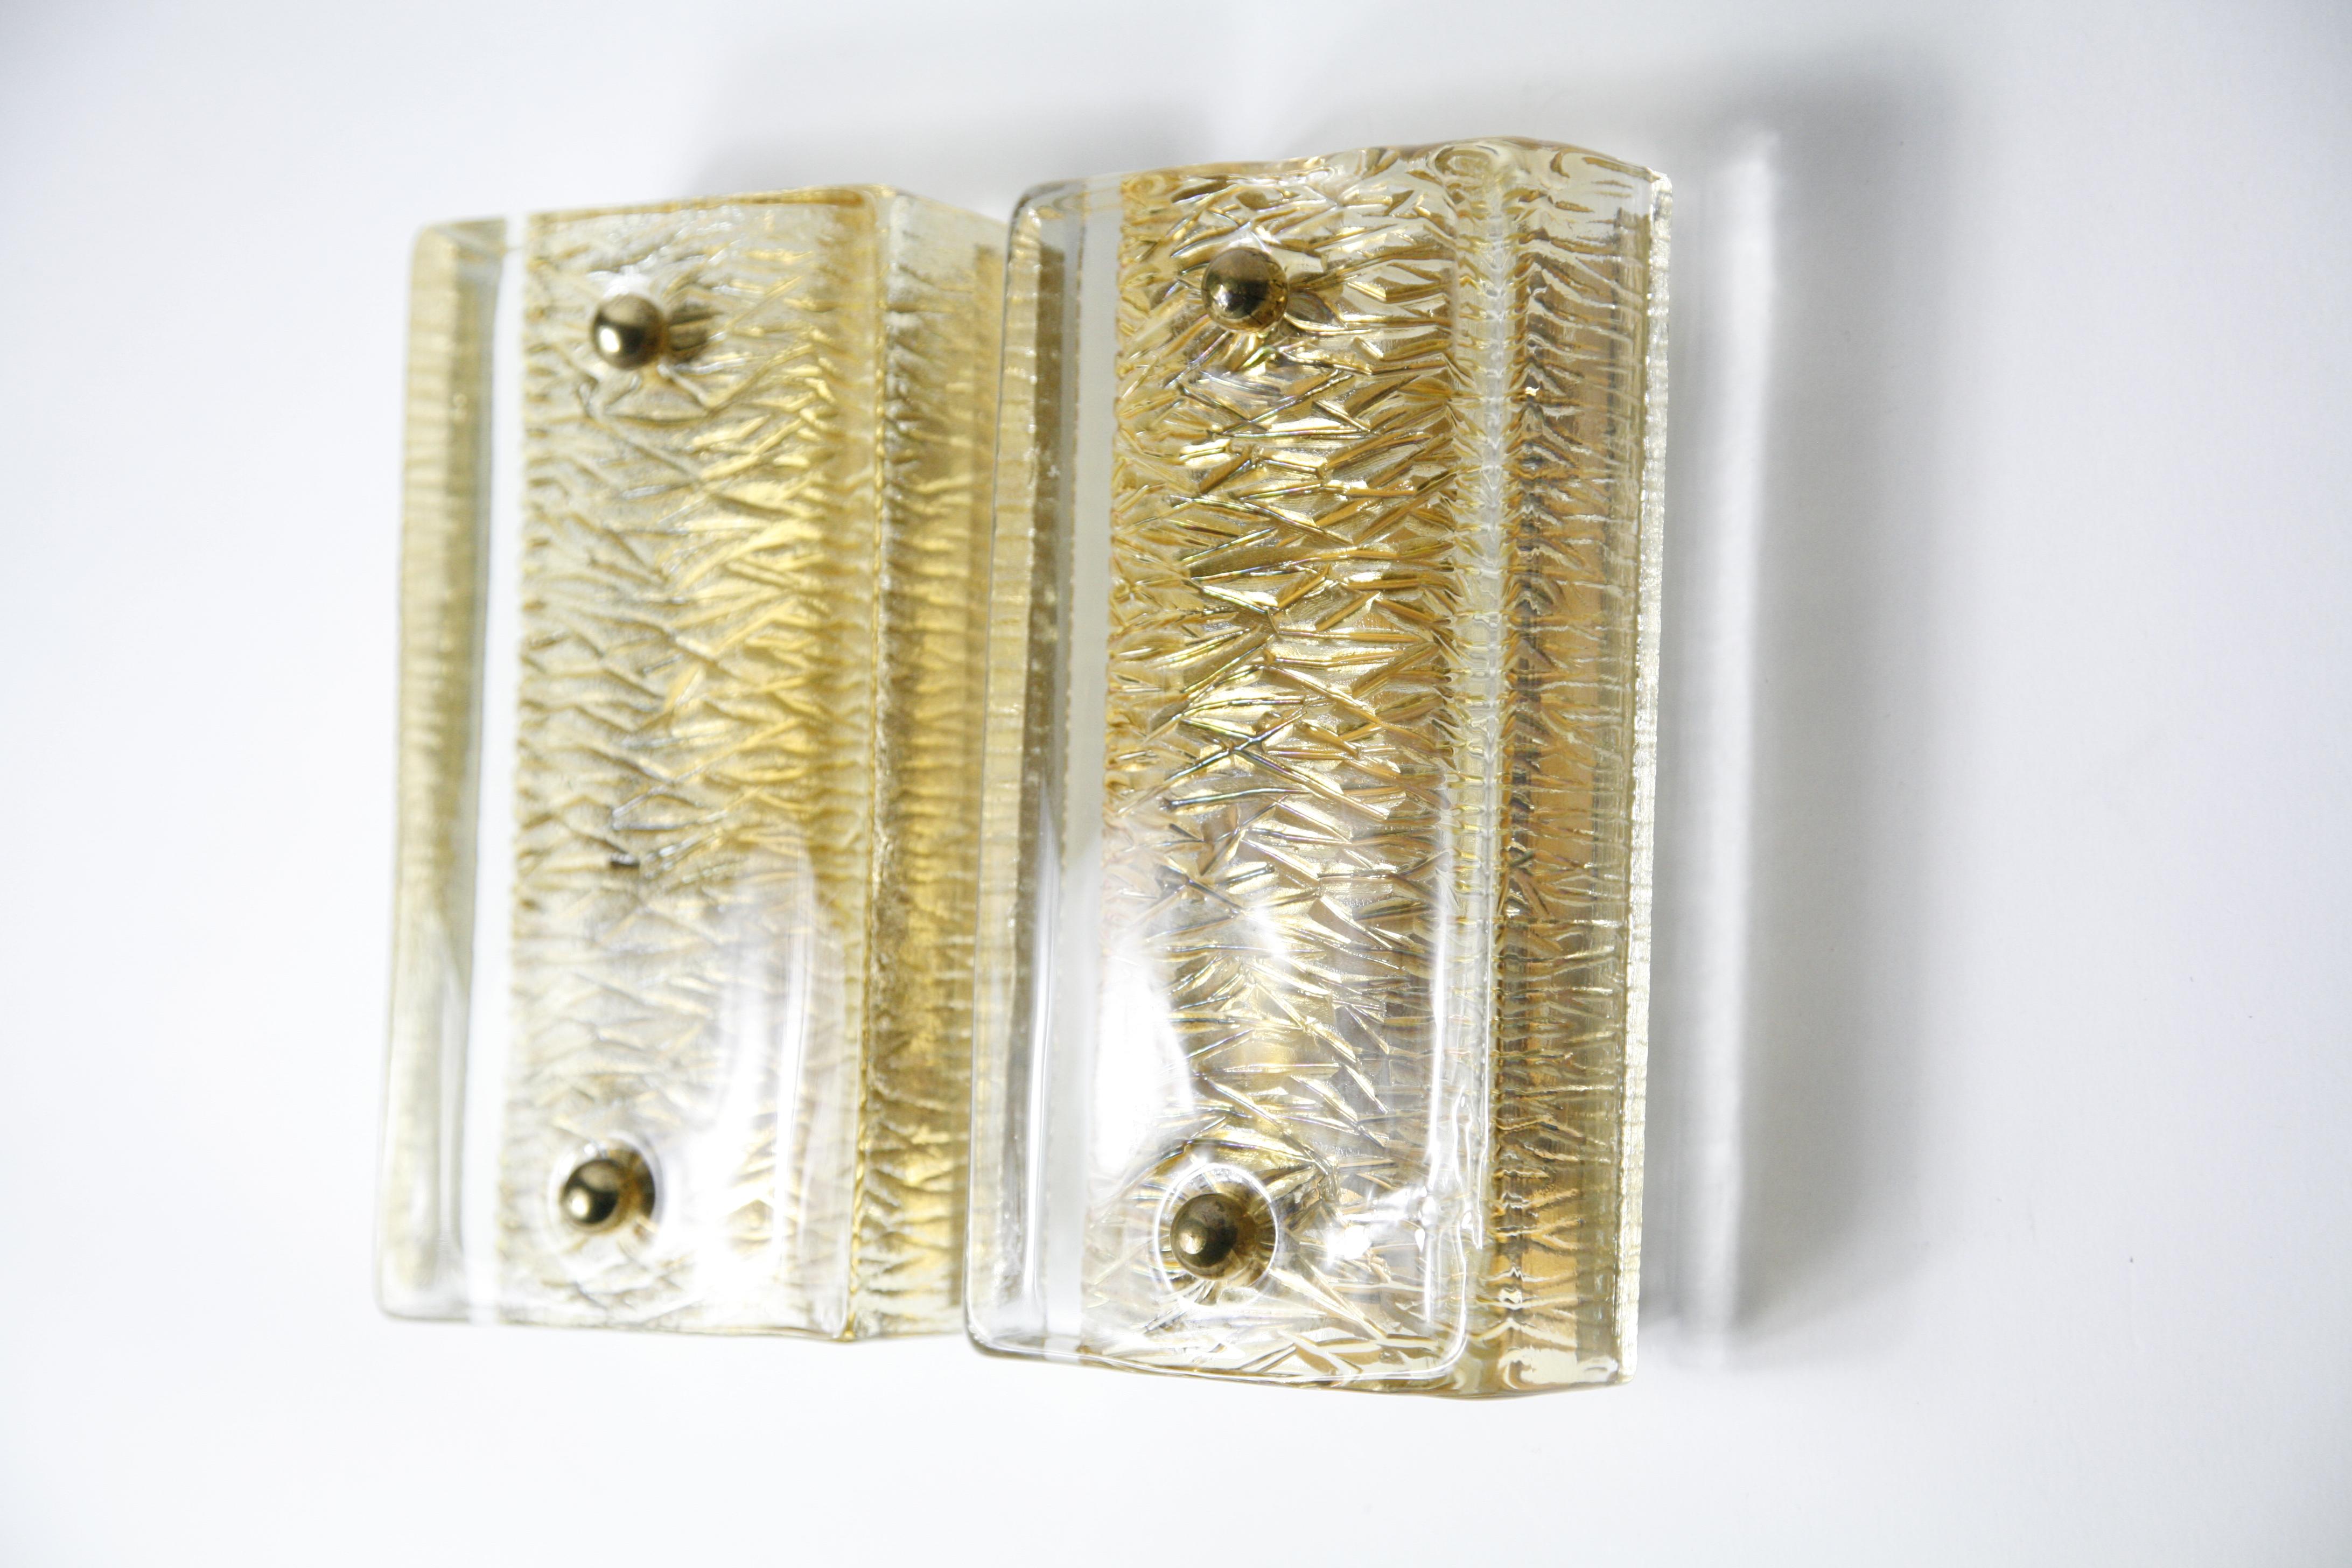 Swedish Pair of Orrefors Sconces Brass and Crystal Glass Shades by Orrefors Sweden, 1970